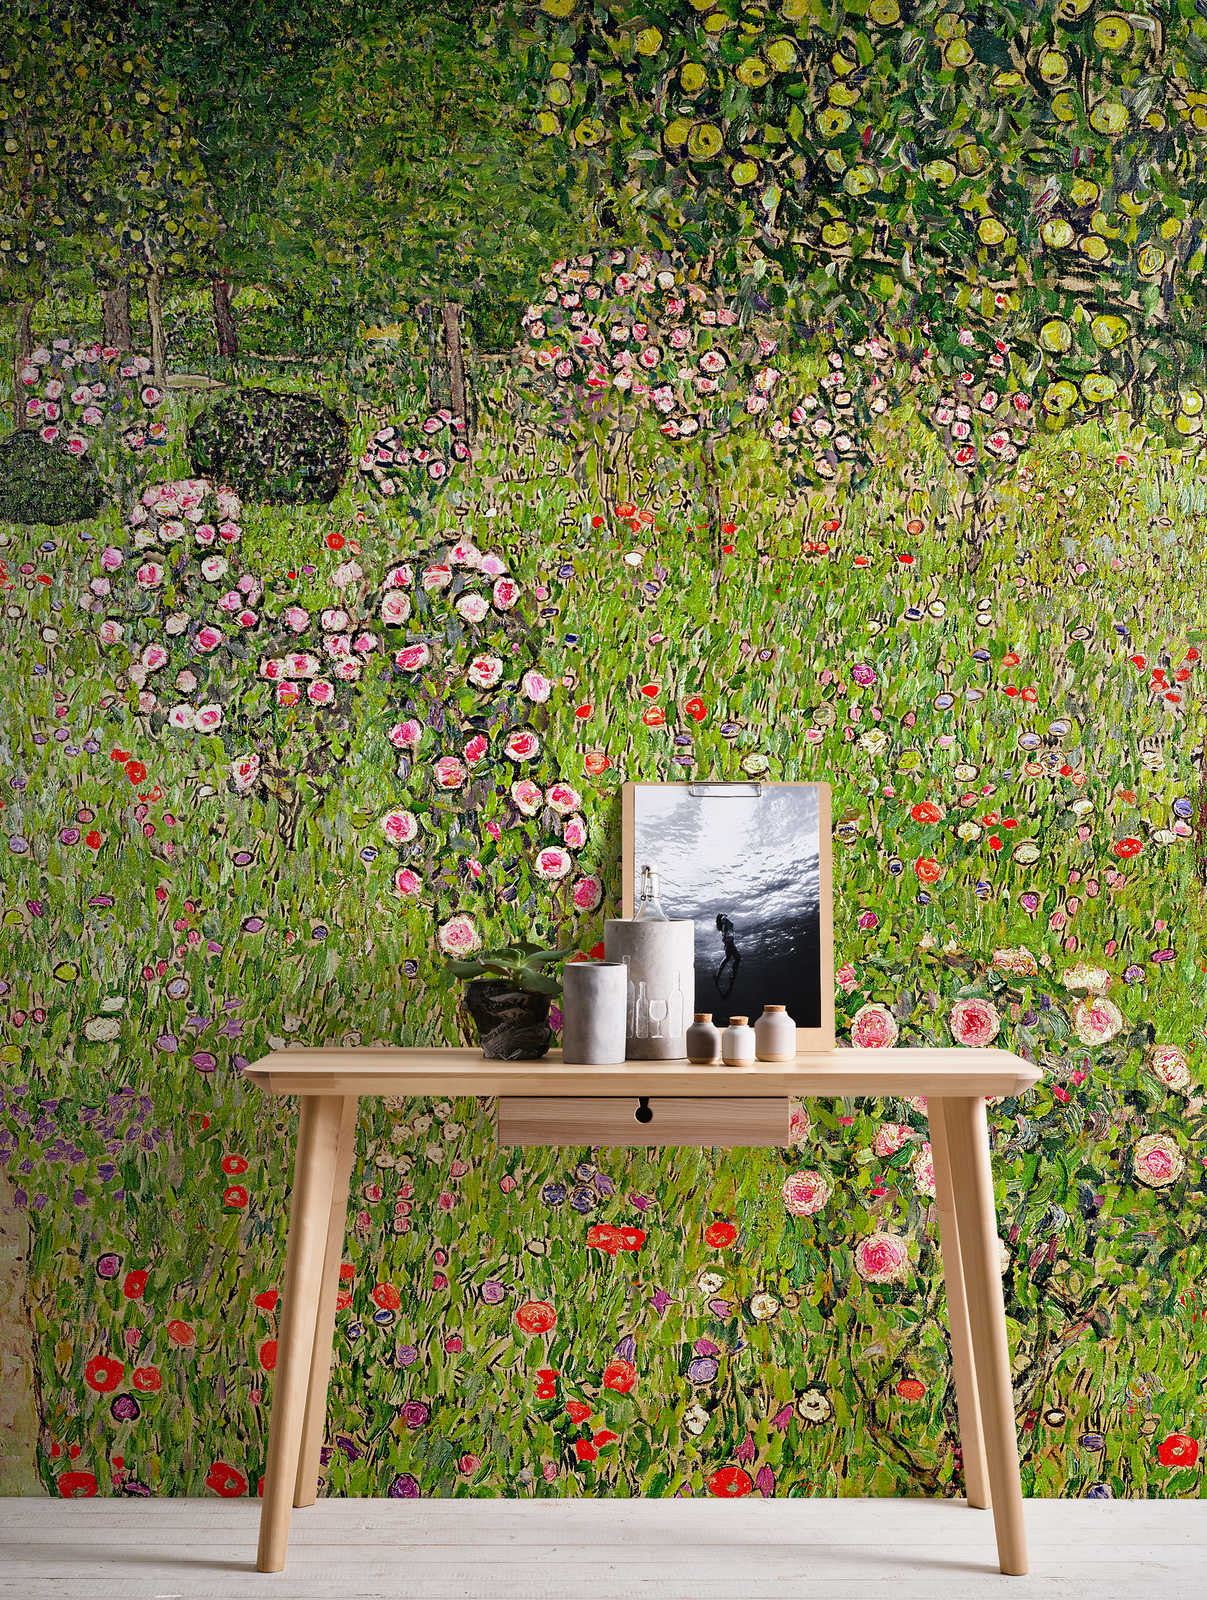             Photo wallpaper "Orchard with roses" by Gustav Klimt
        